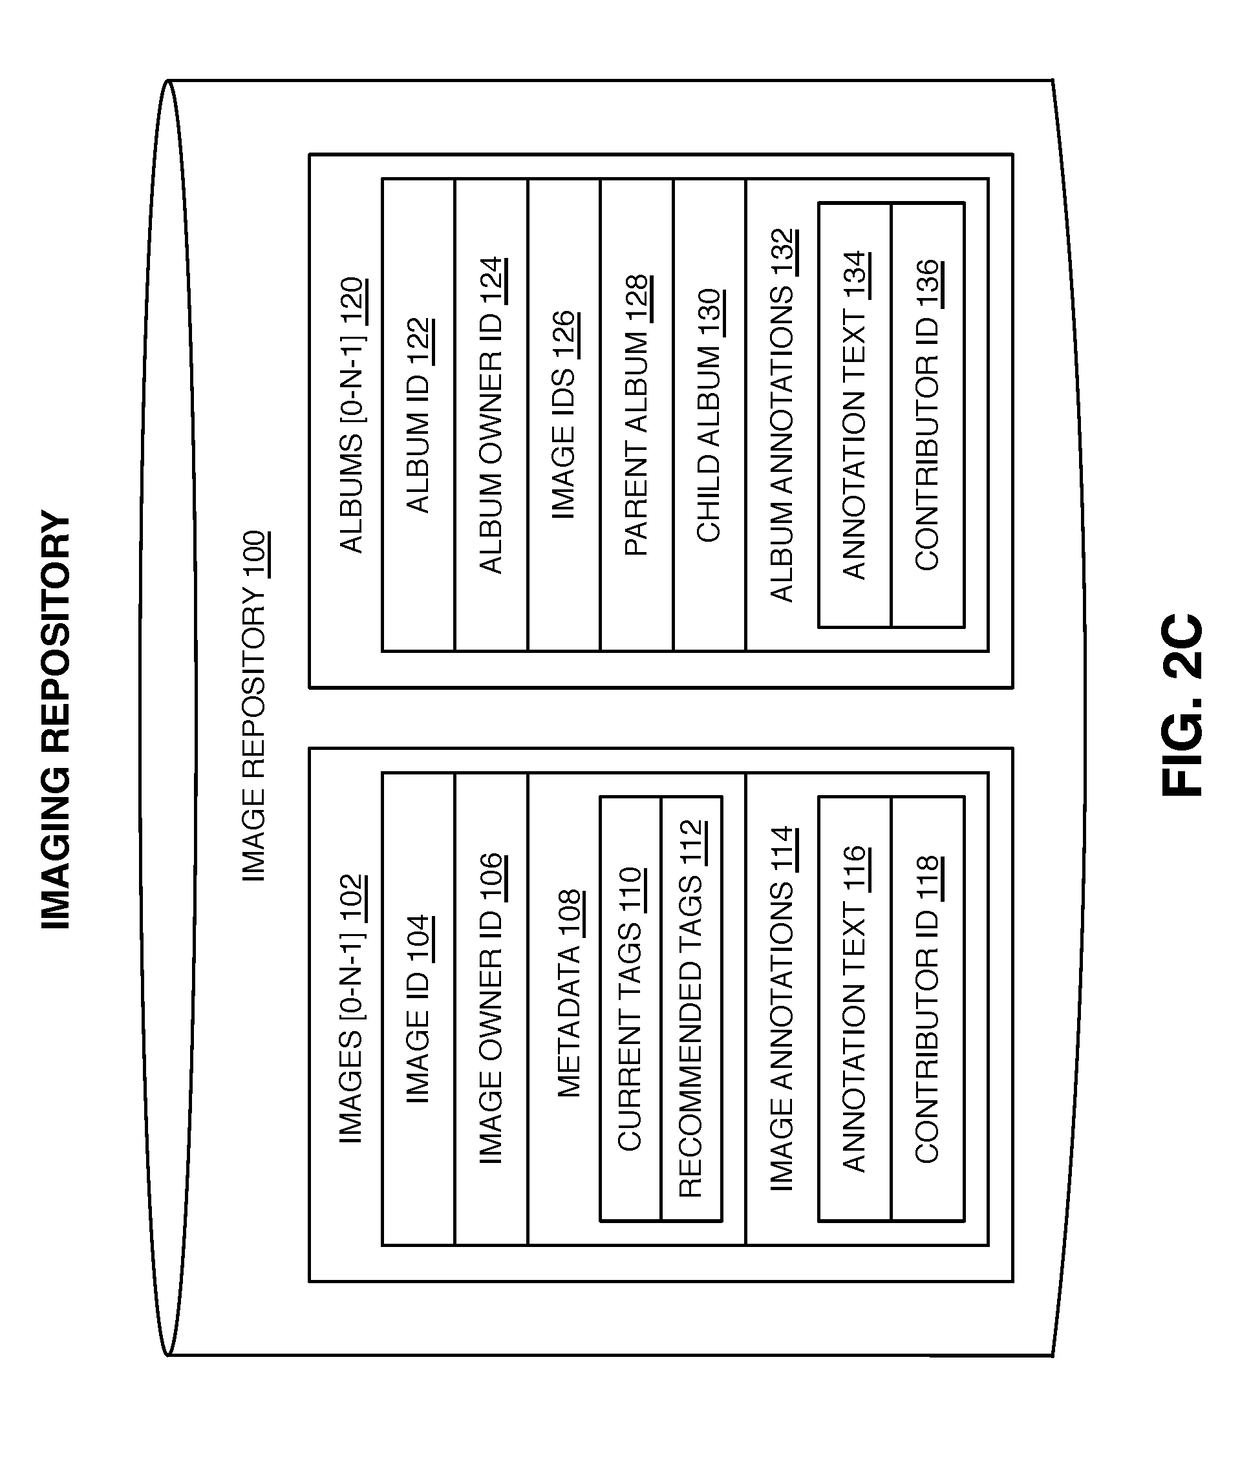 Method And System For Image Tagging In A Social Network